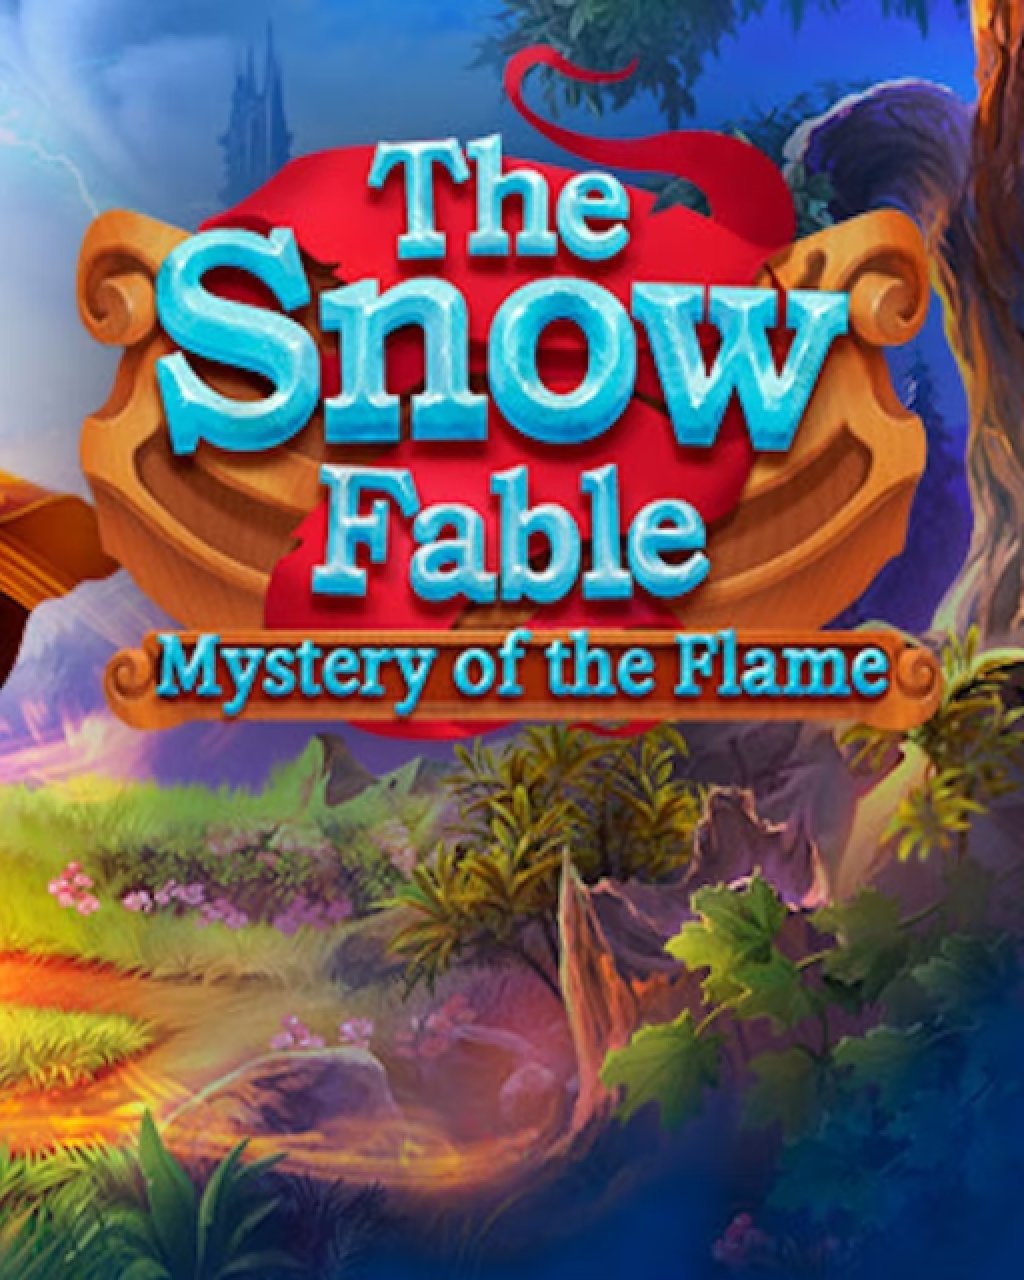 The Snow Fable Mystery of the Flame